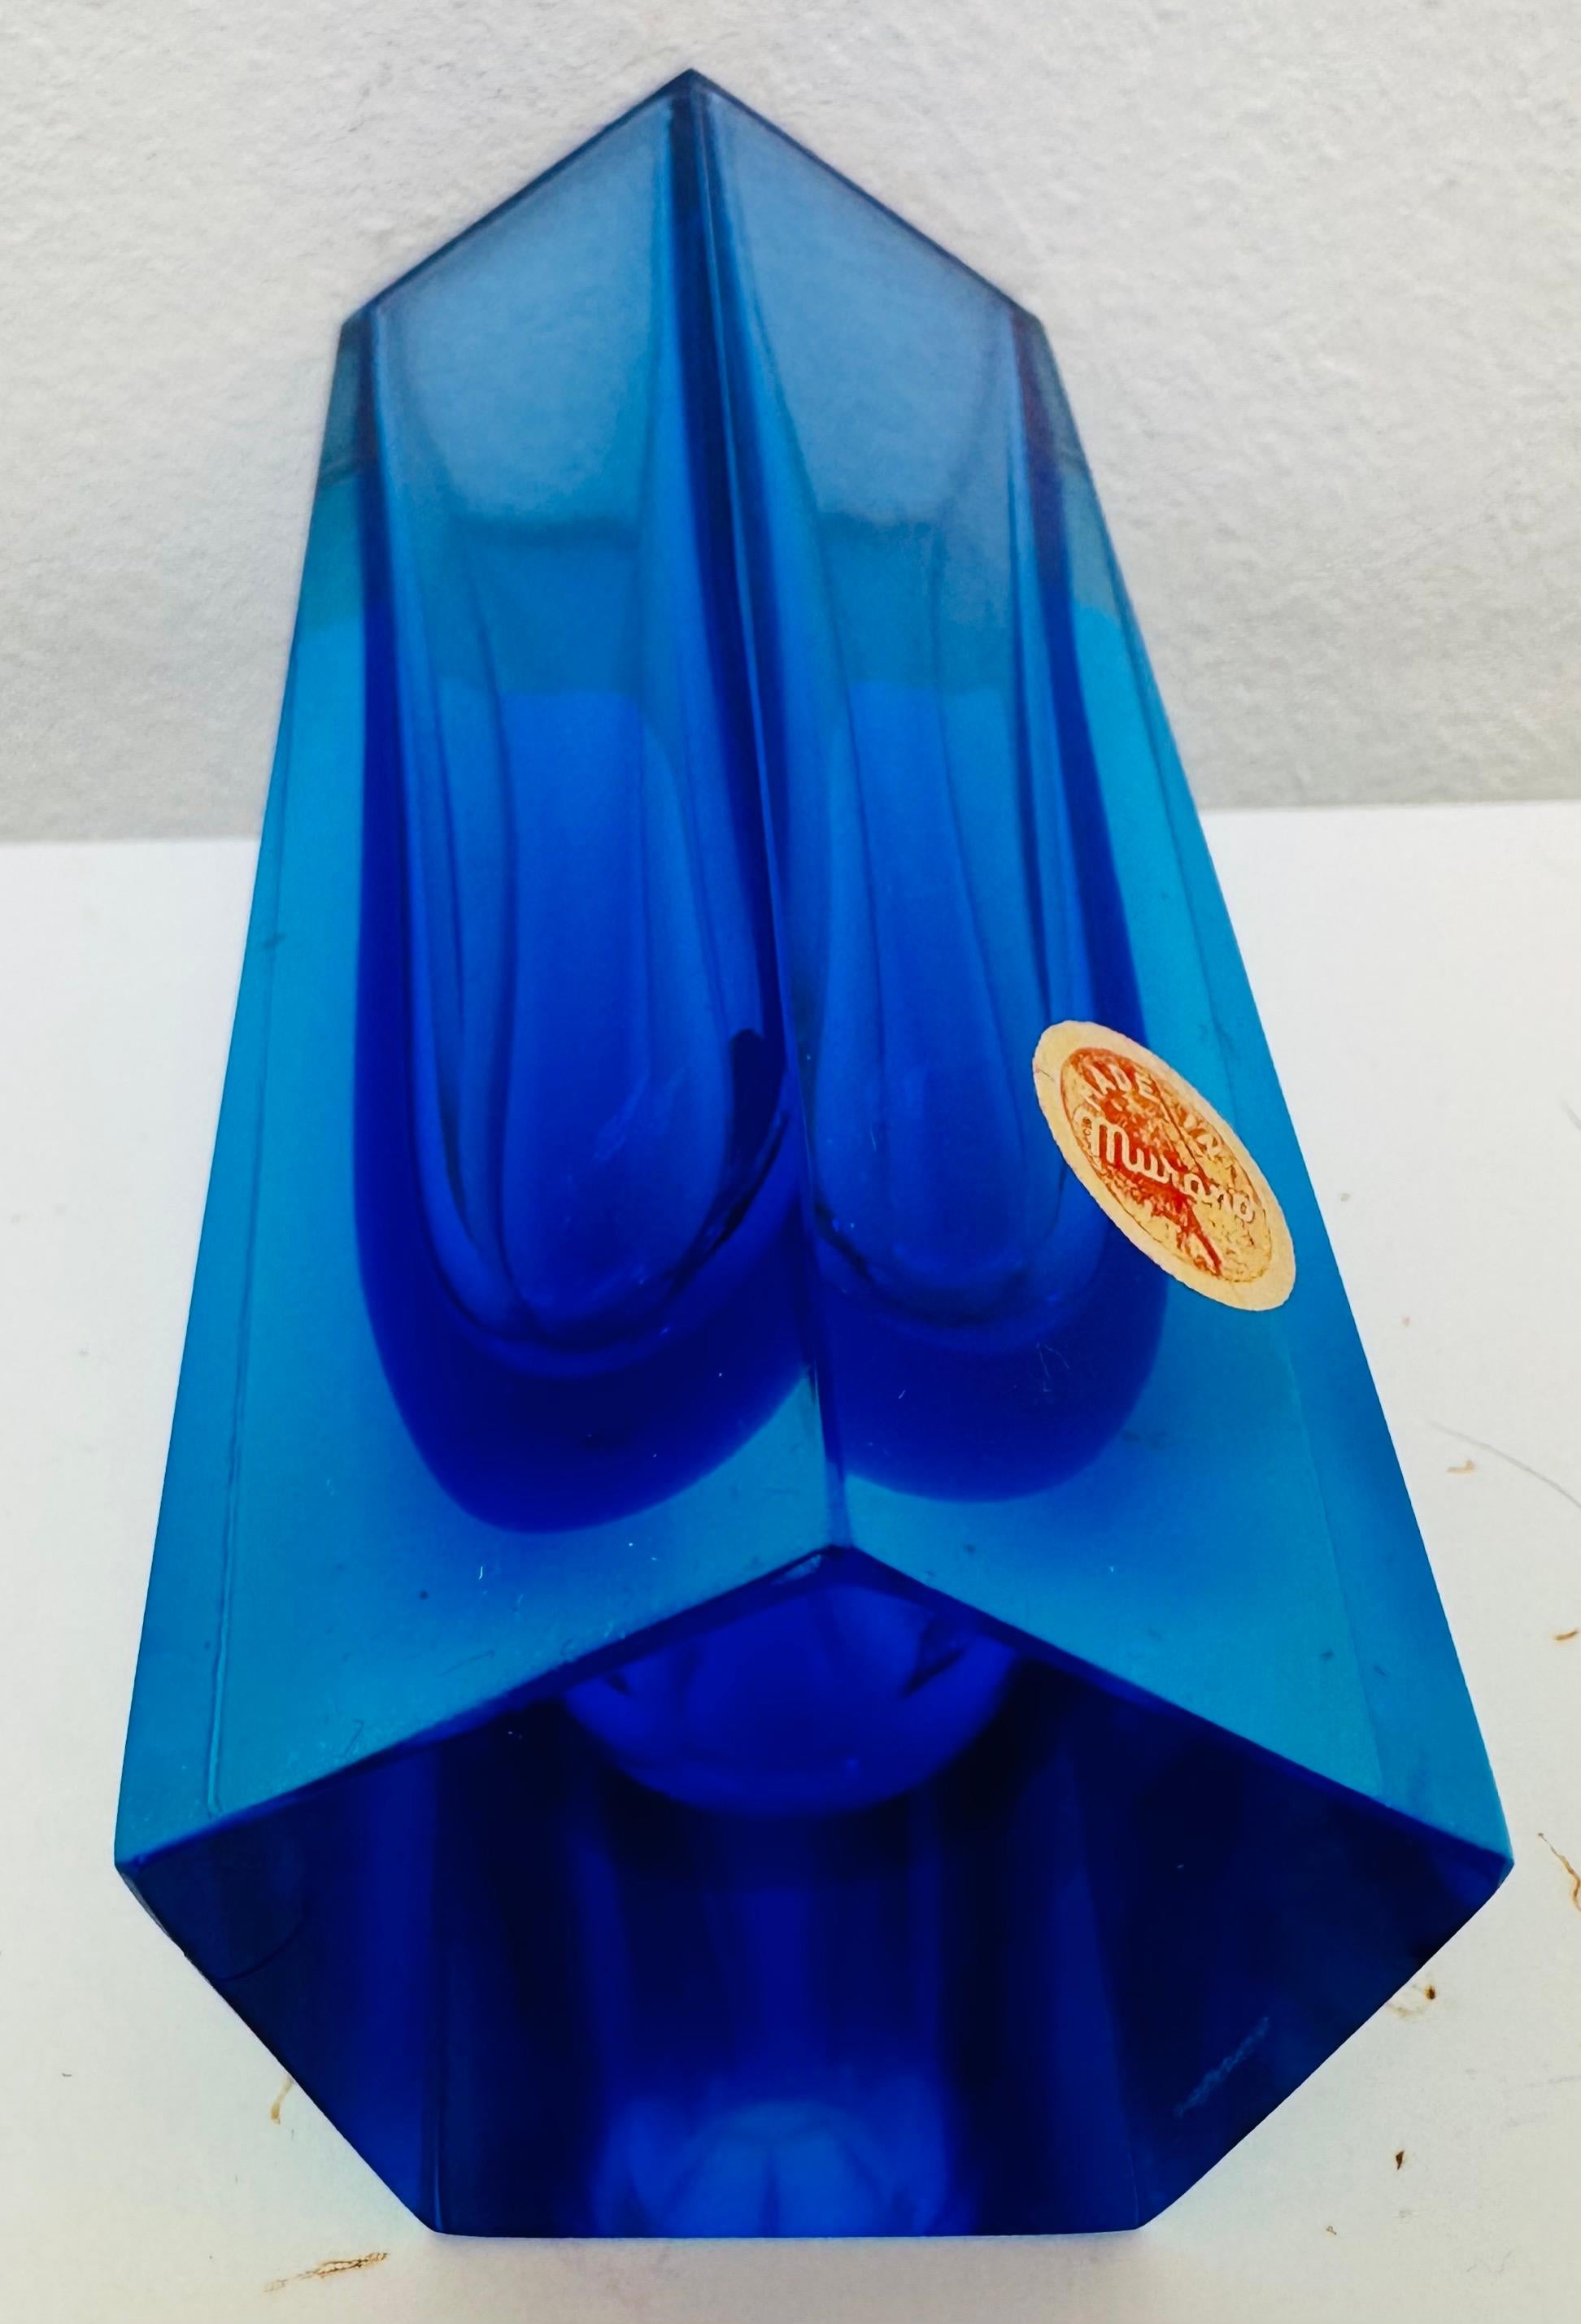 Small 1970s Mid Century Italian Murano Blue & Turquoise Sommerso Glass Vase For Sale 5